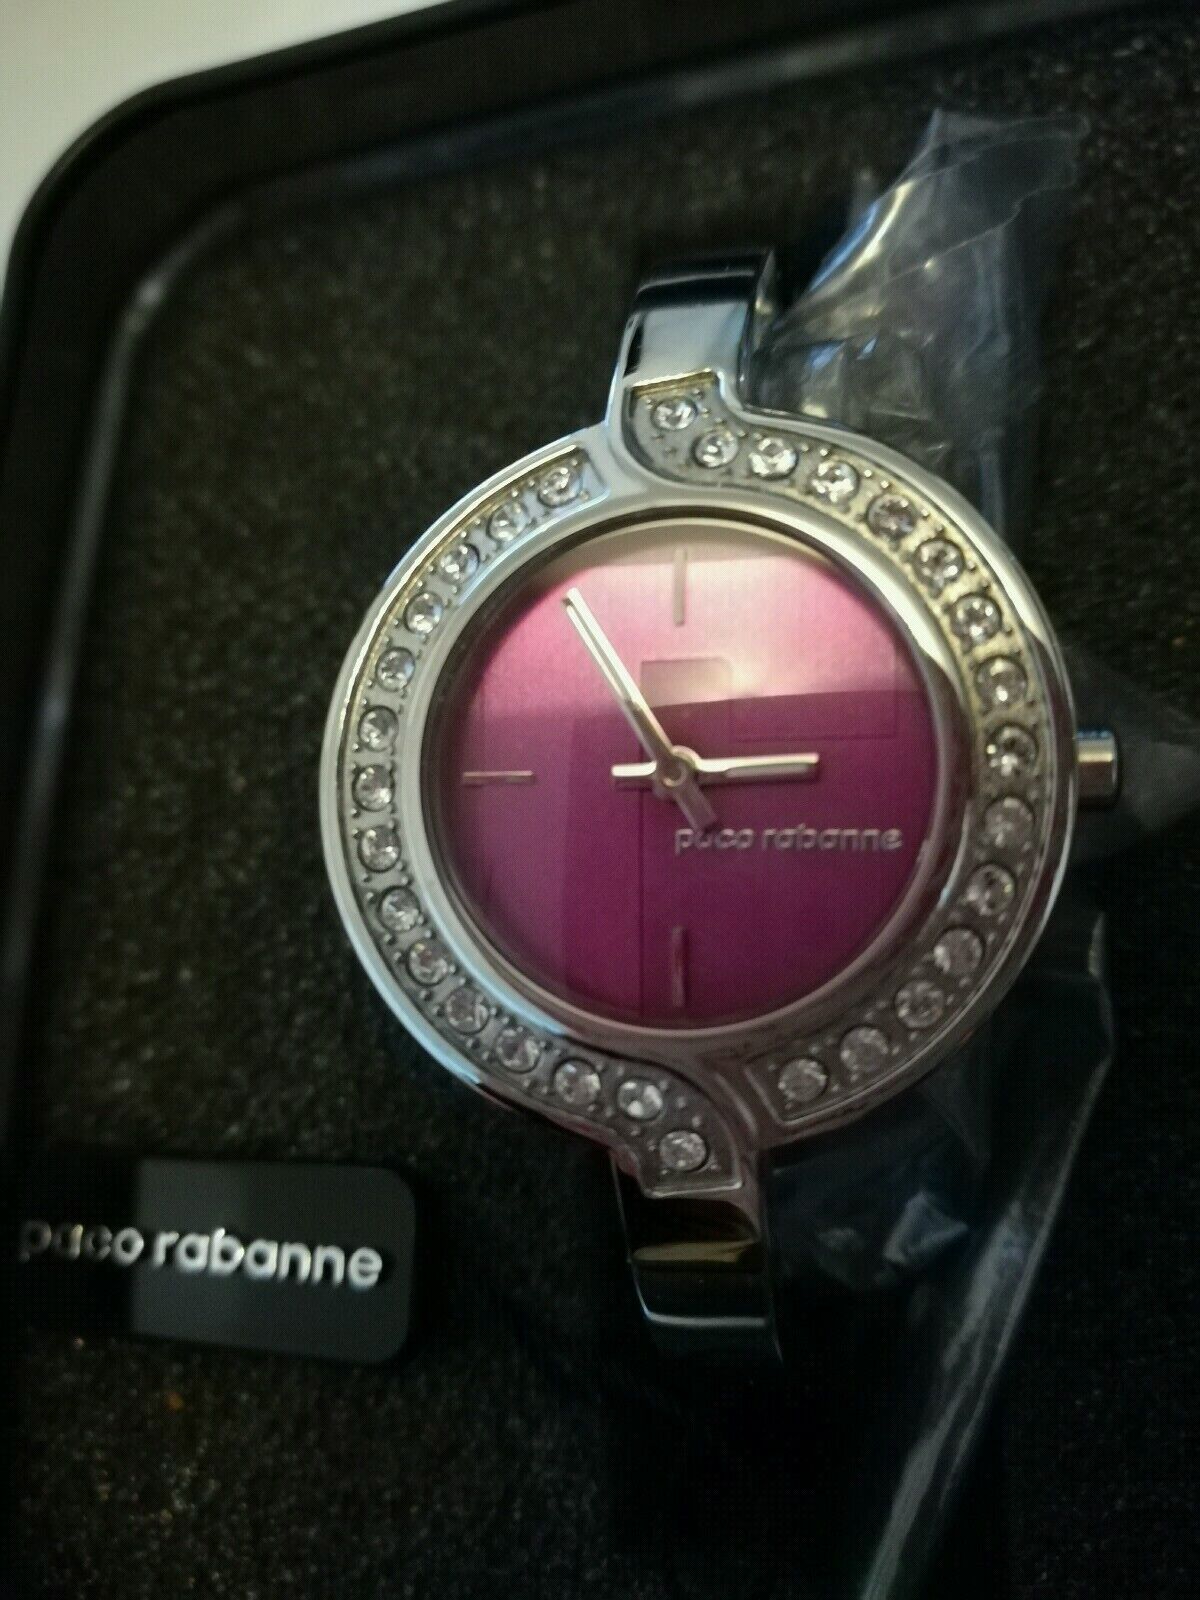 Gorgeous womens brand watch paco rabanne in very good condition